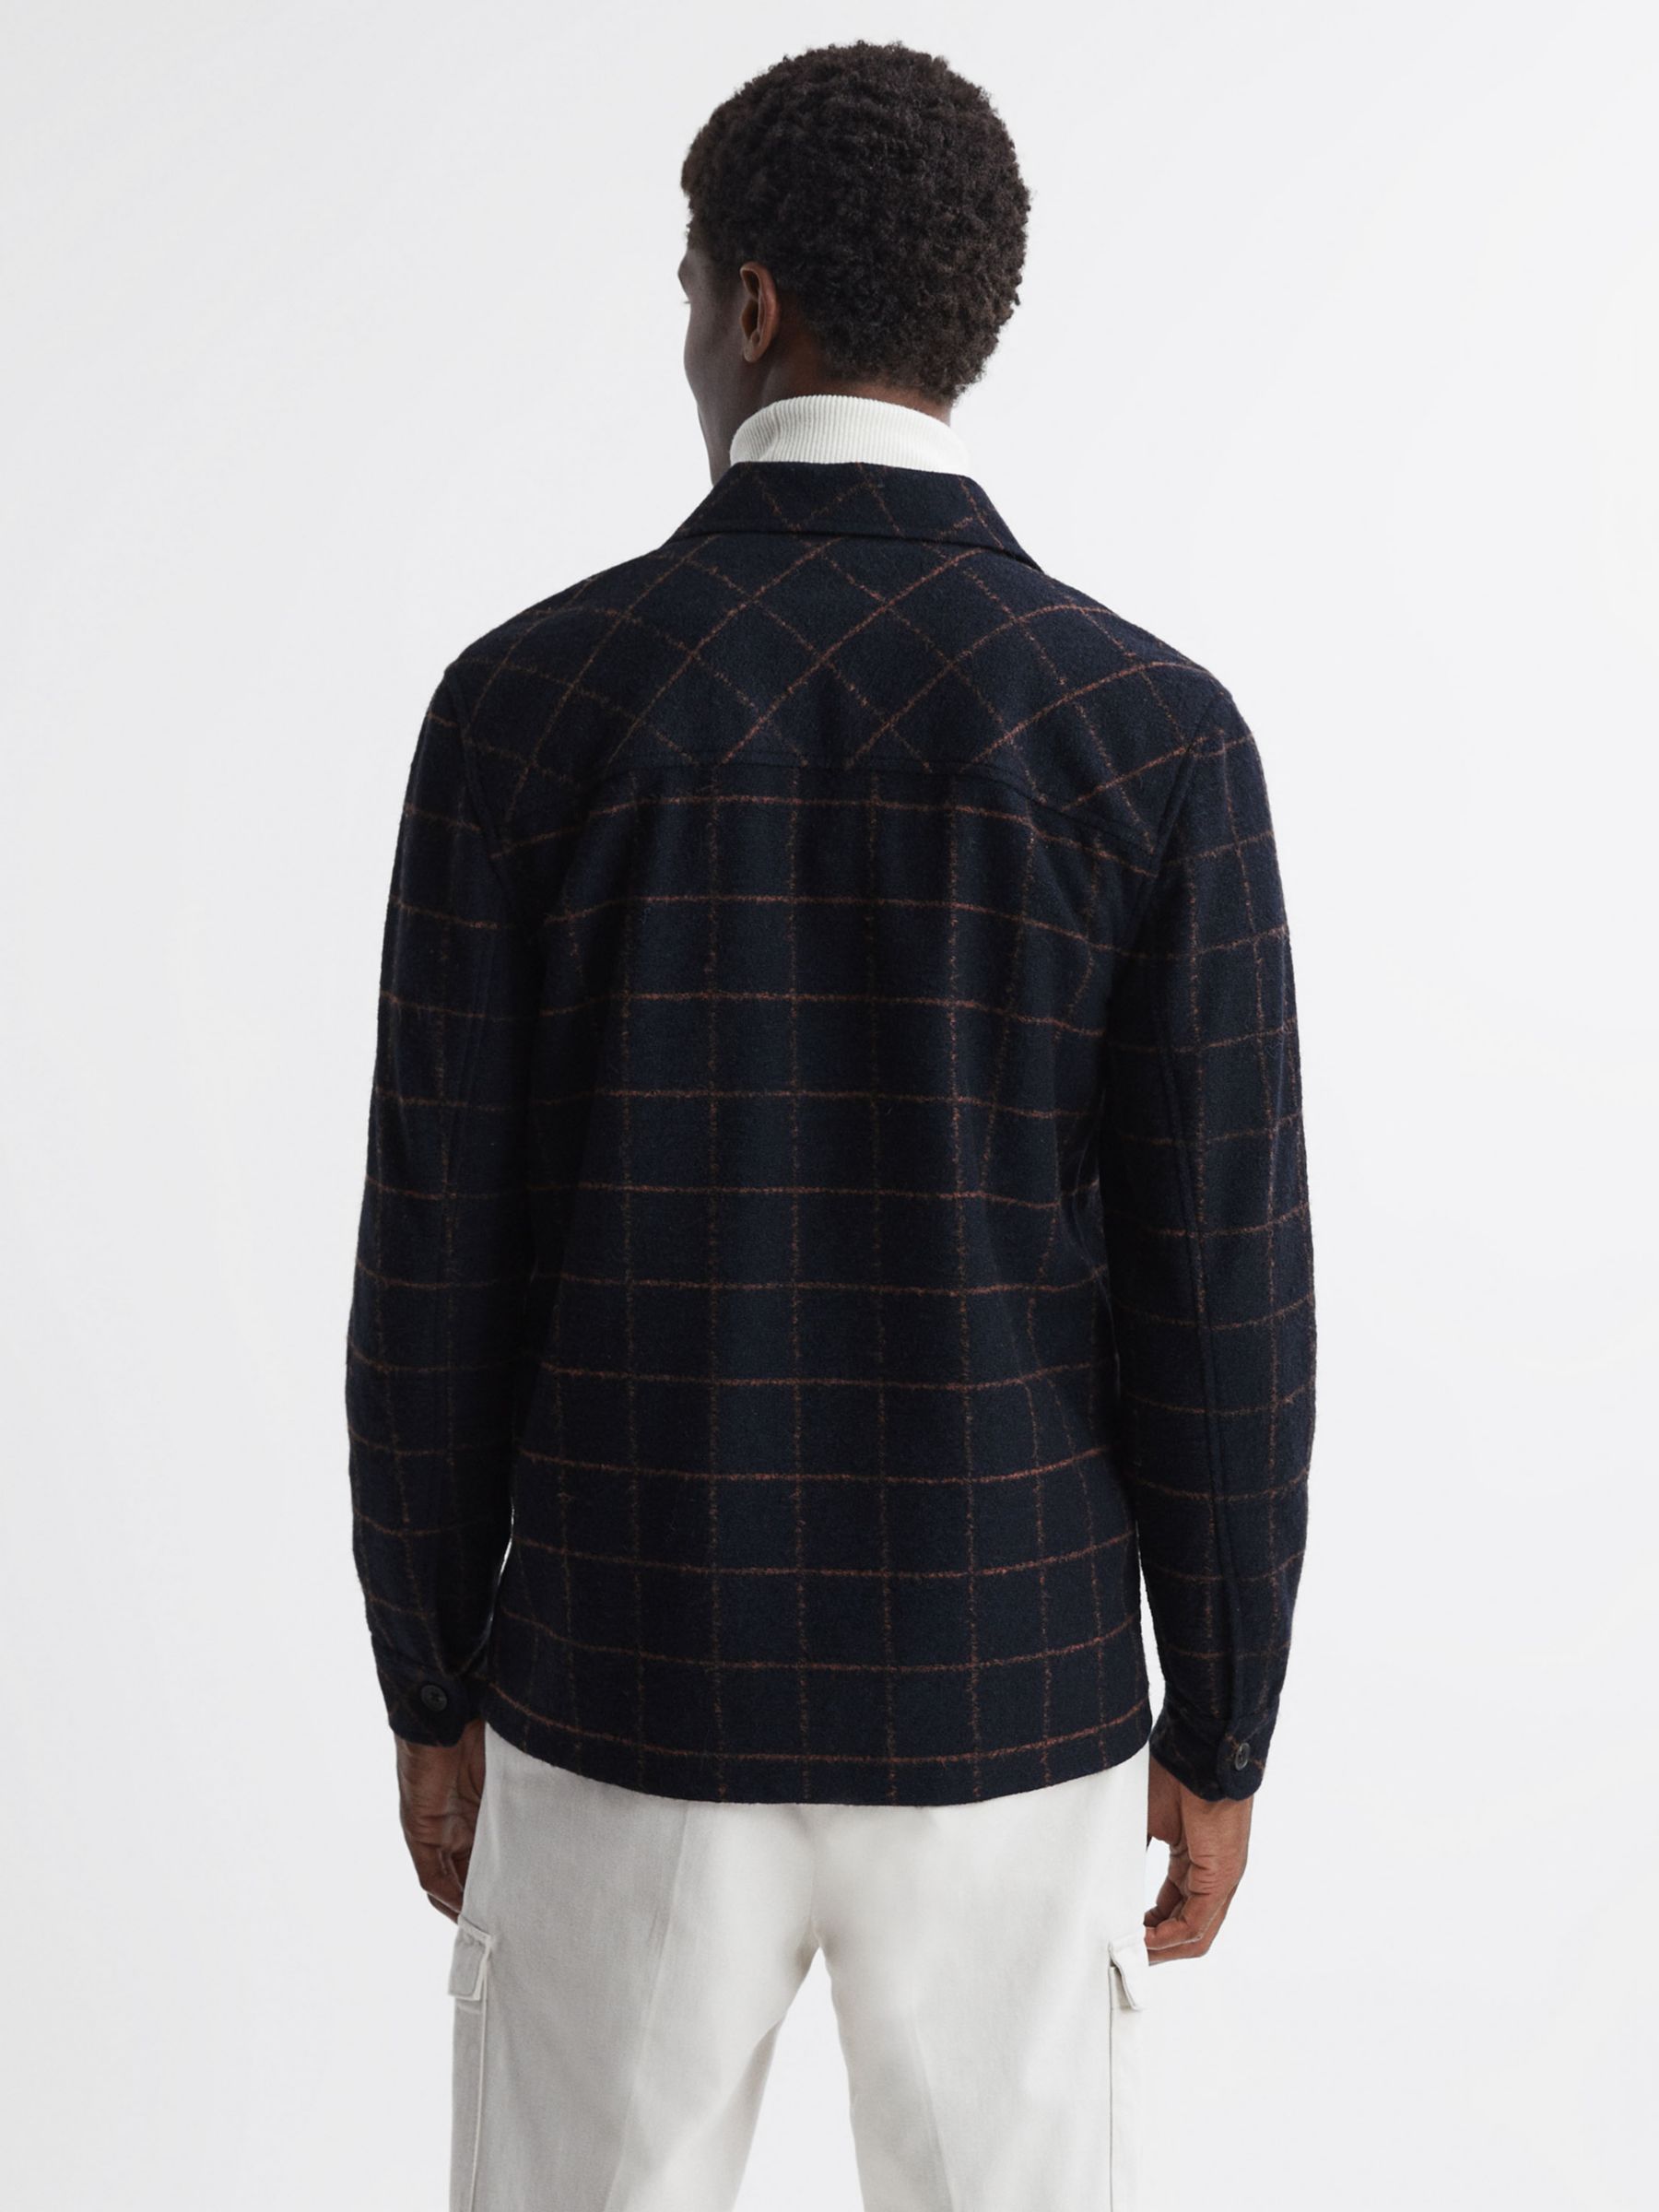 Reiss Pearce Wool Blend Long Sleeve Brushed Check Shirt, Navy at